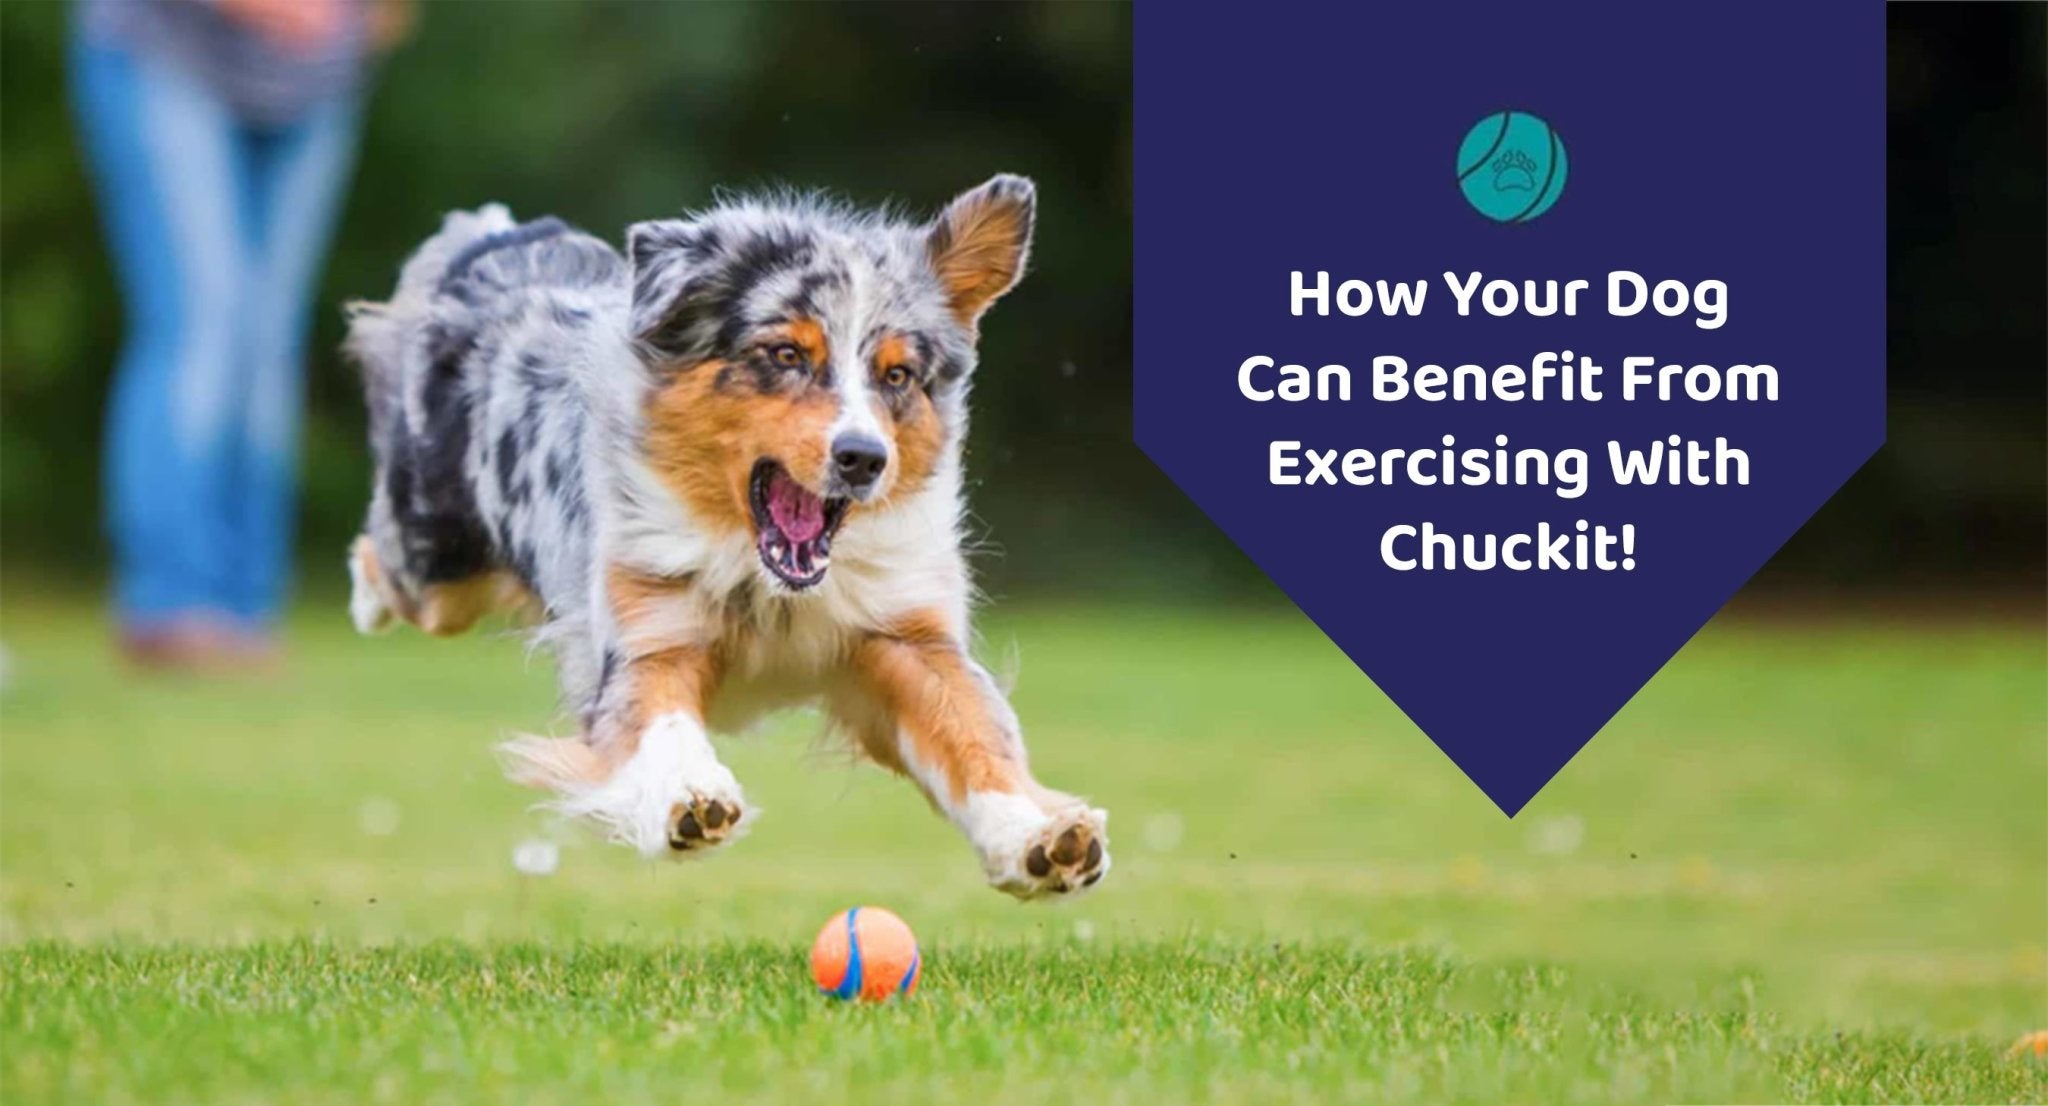 How Your Dog Can Benefit From Exercising With Chuckit!